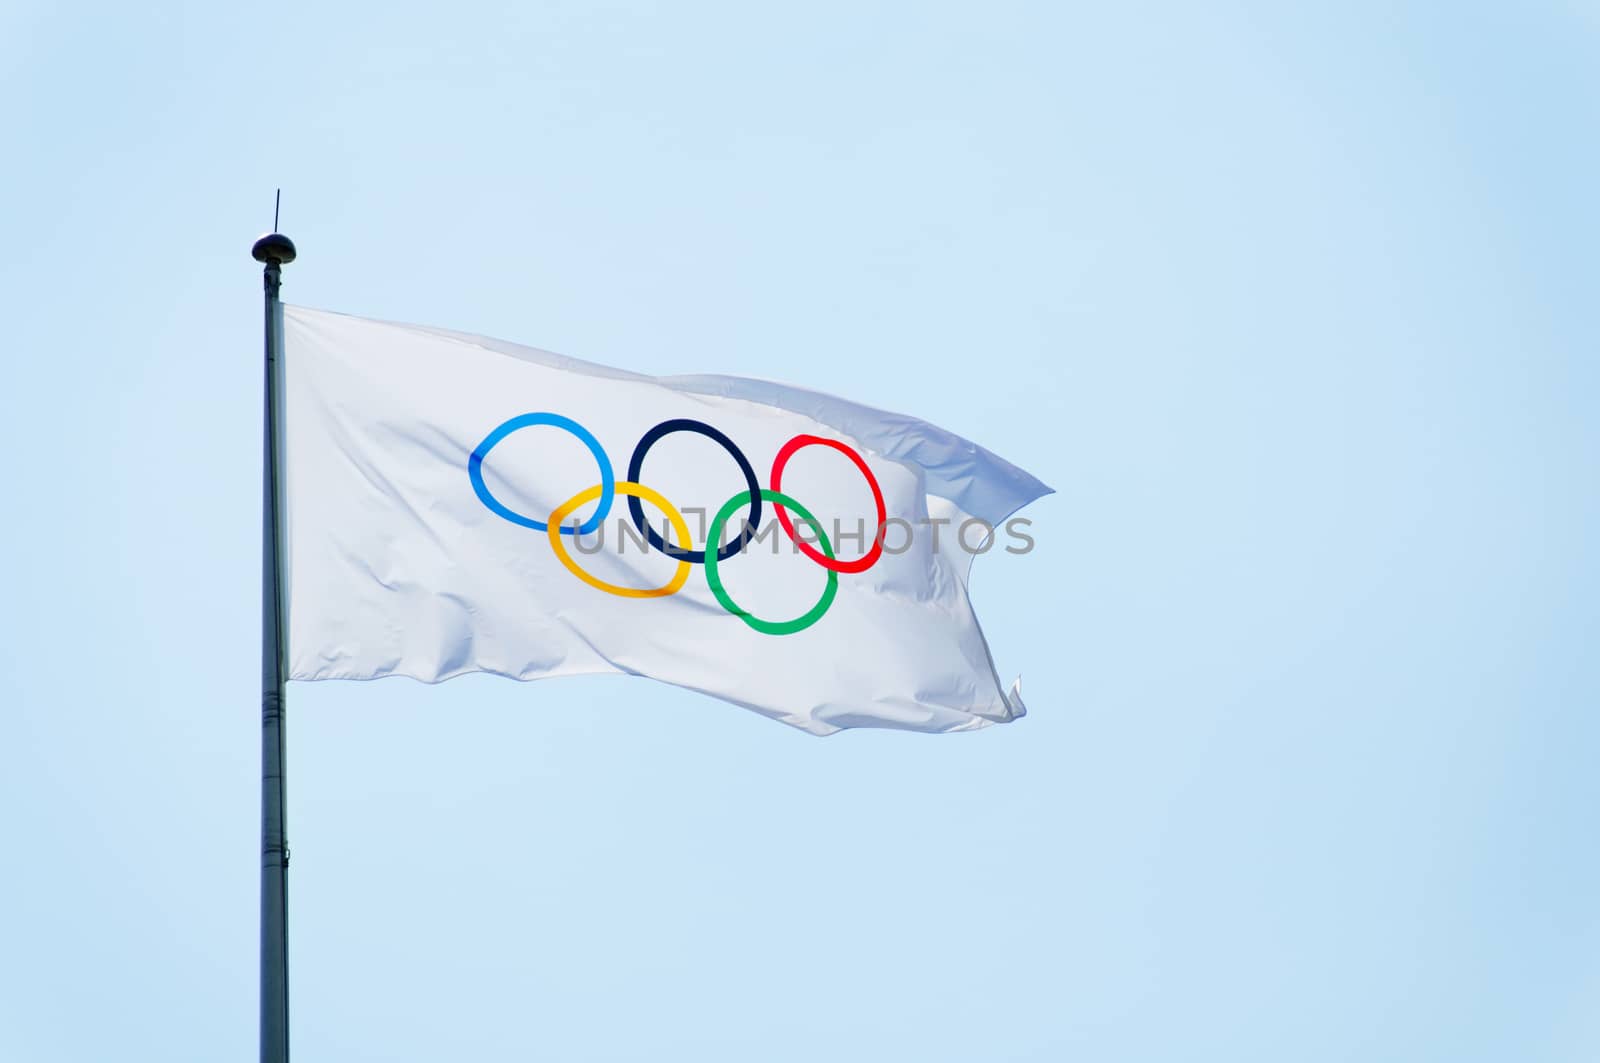 LONDON, UK - CIRCA JULY 2012: Olympic flag against blue sky background during London 2012 Olympic Games.